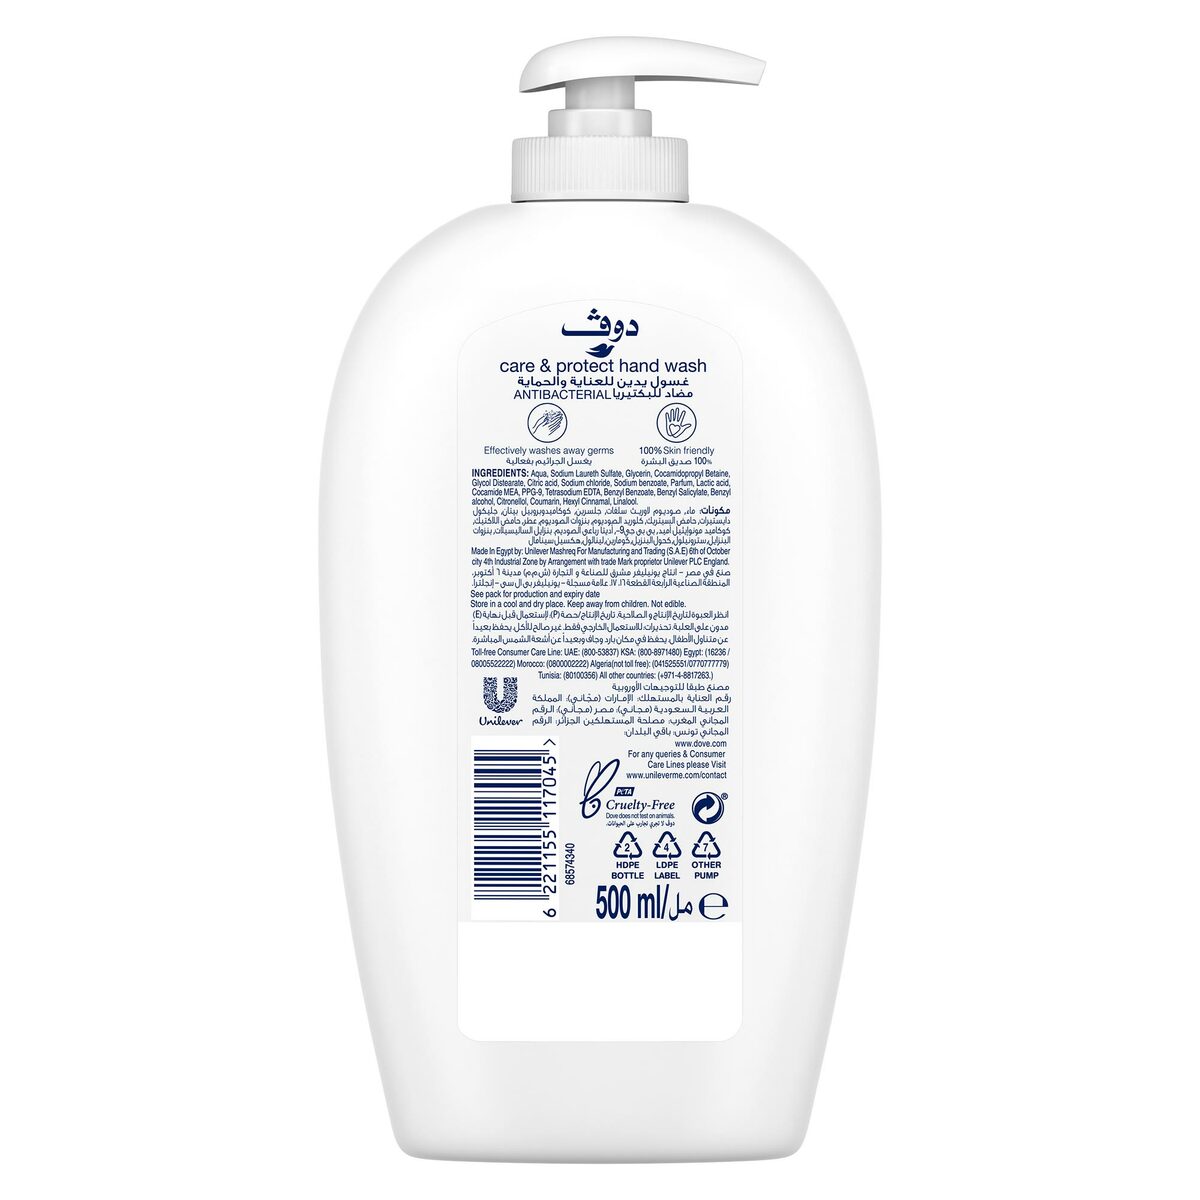 Dove Antibacterial Hand Wash Care & Protect 500ml